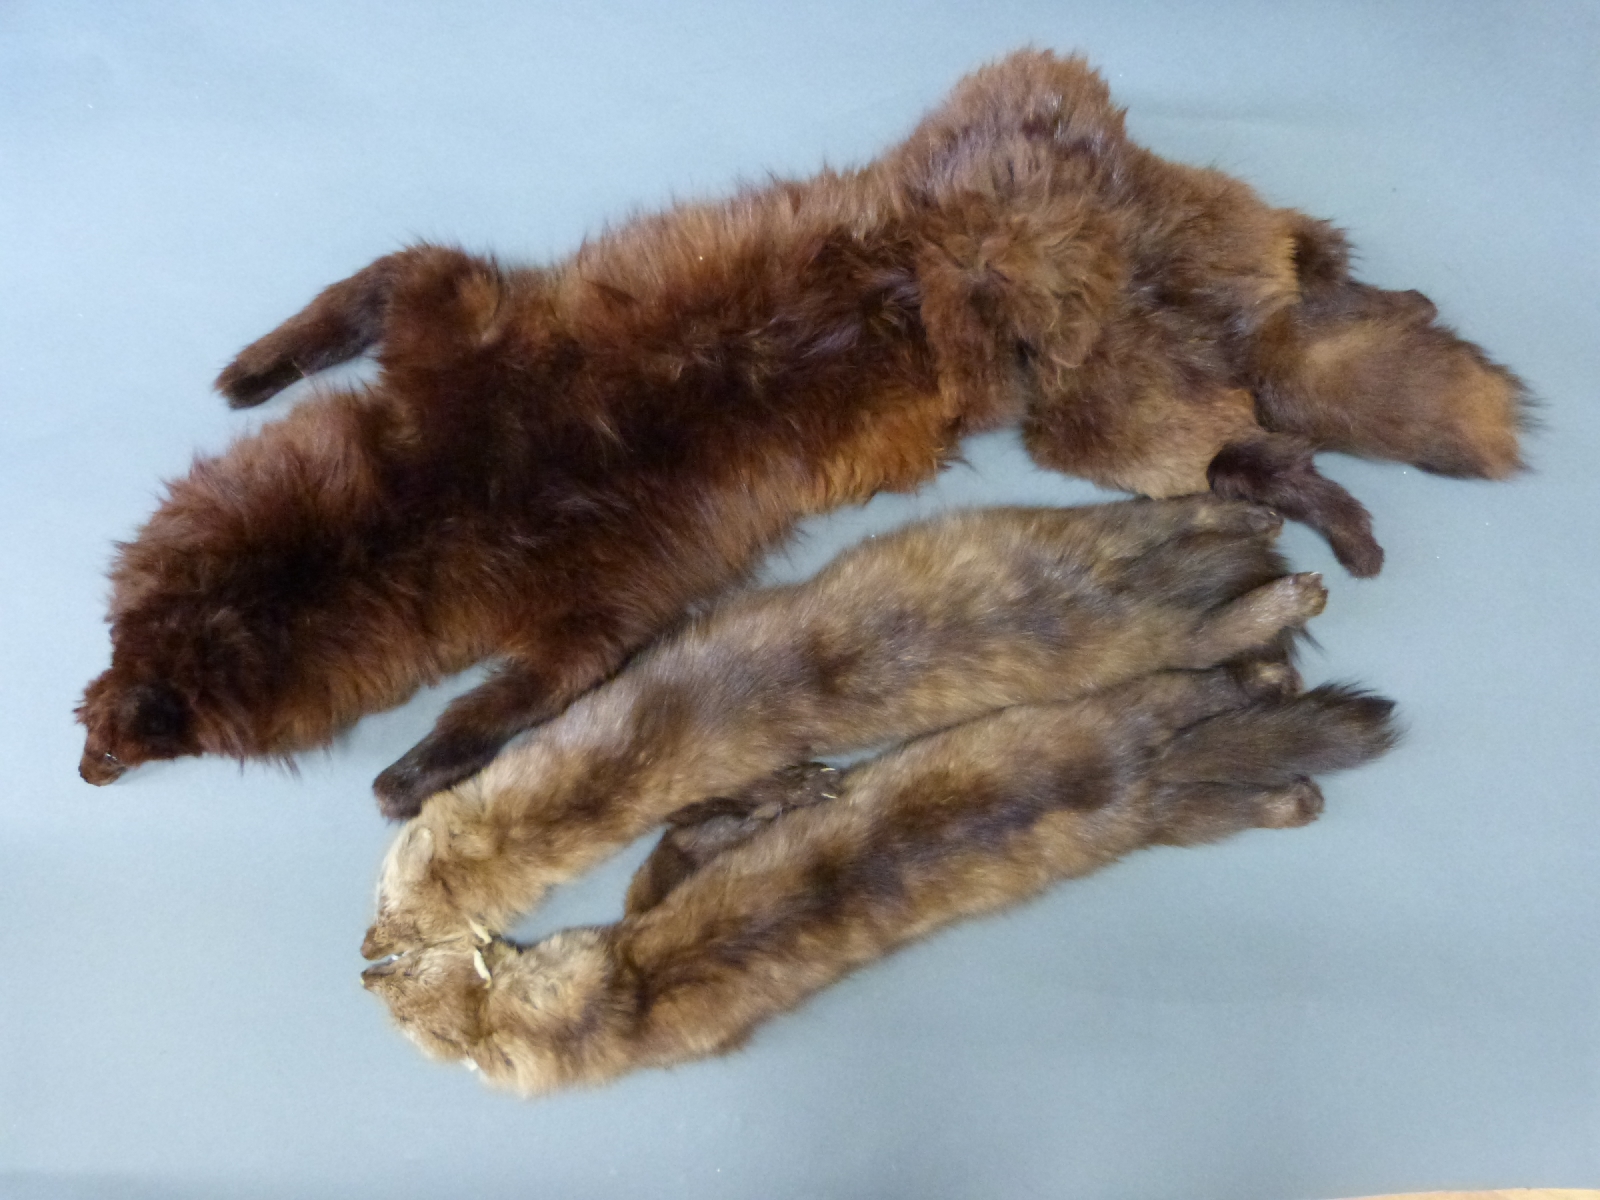 Two taxidermy fur stoles